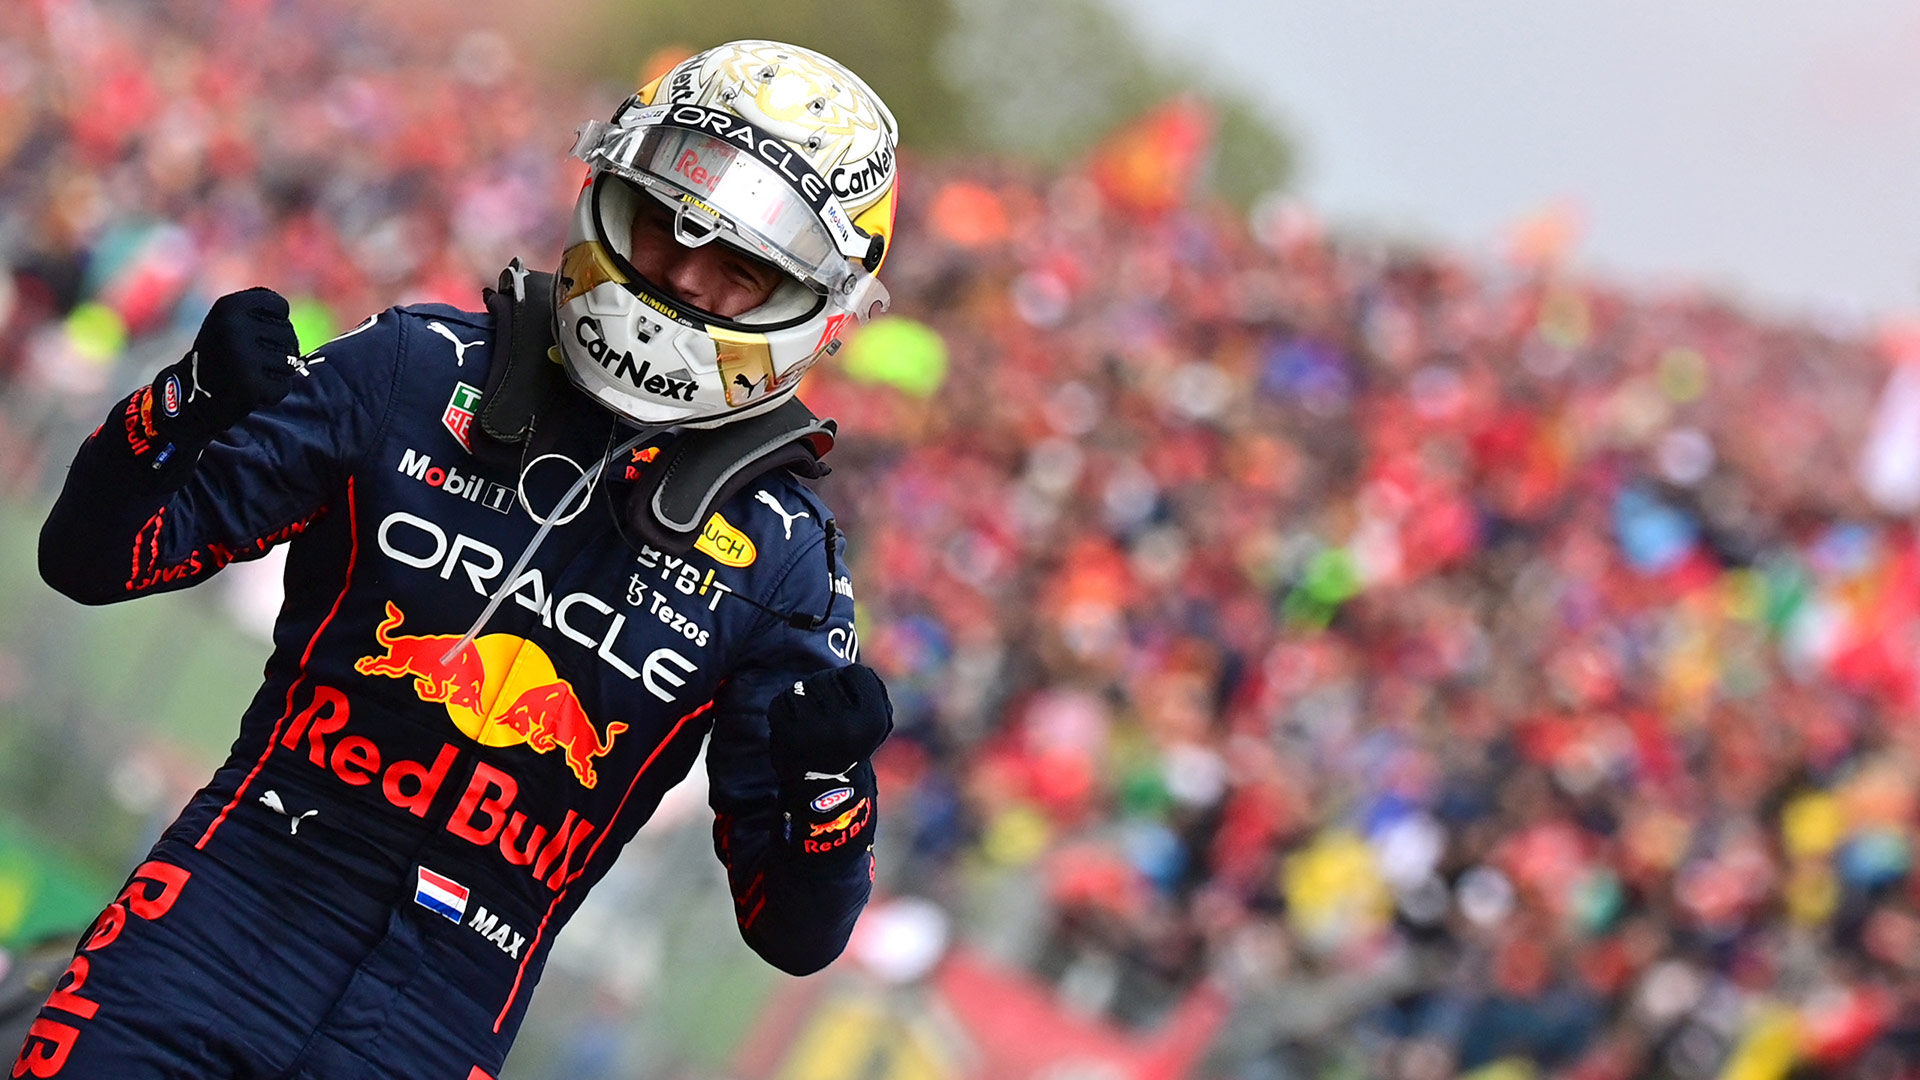 Red Bull's Max Verstappen reacts after winning the Emilia Romagna F1 Grand Prix in April 2022. He will be among the favorites for the F1 Spanish Grand Prix live stream